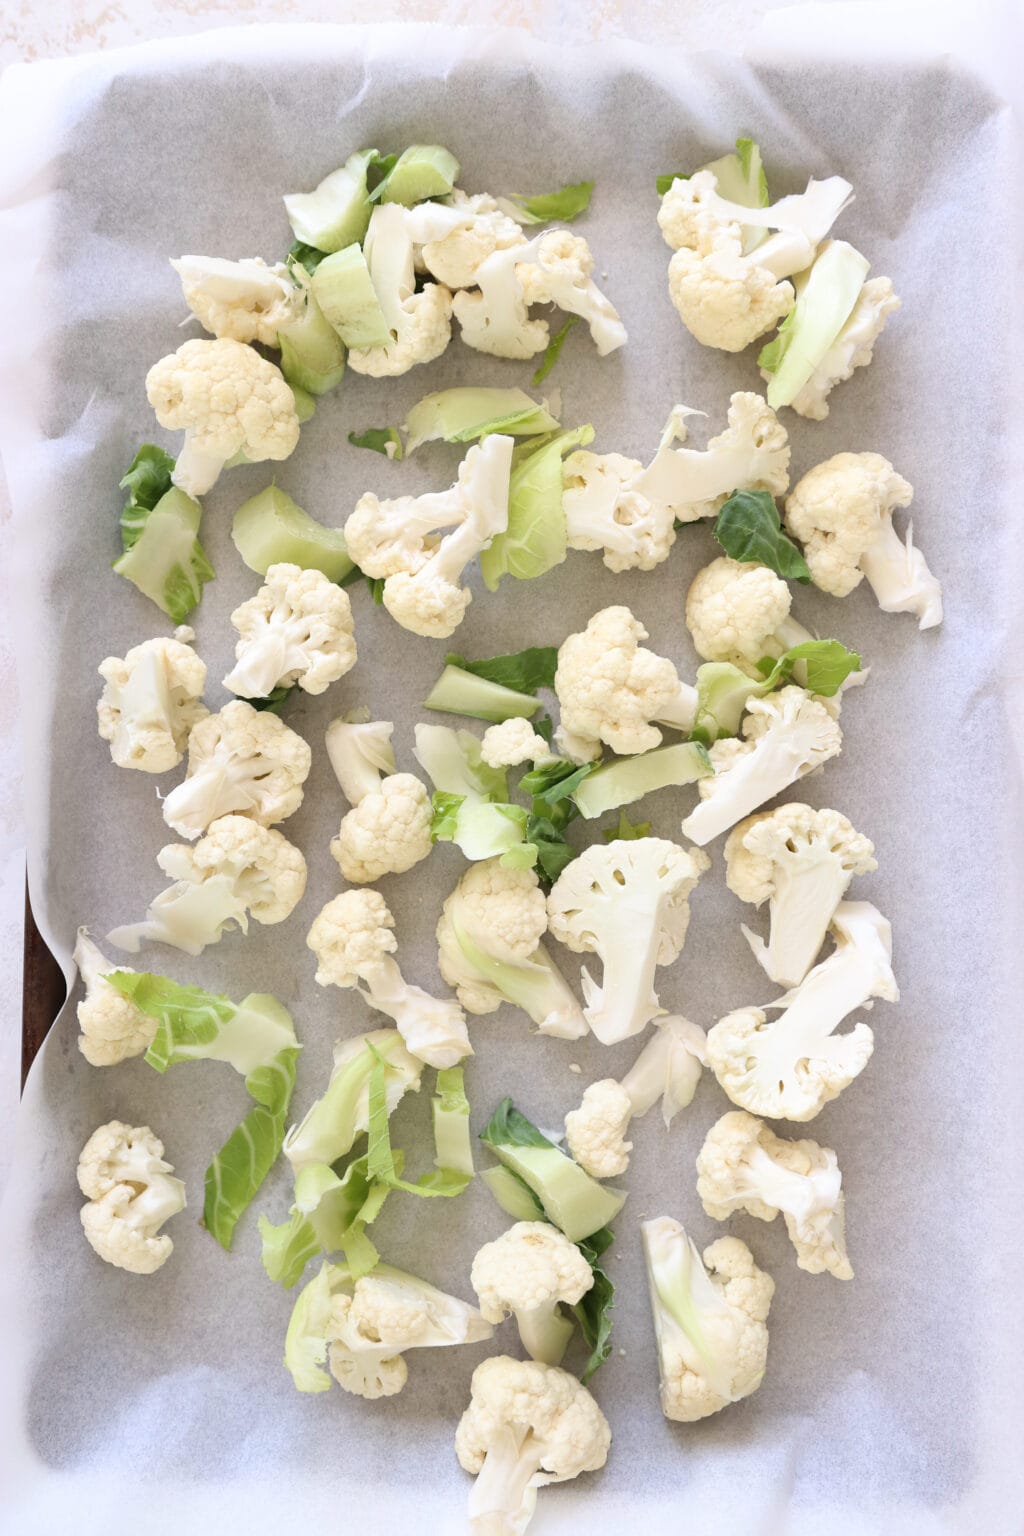 Raw cauliflower florets are on a parchment lined baking sheet. The cauliflower greens are also on the baking sheet.